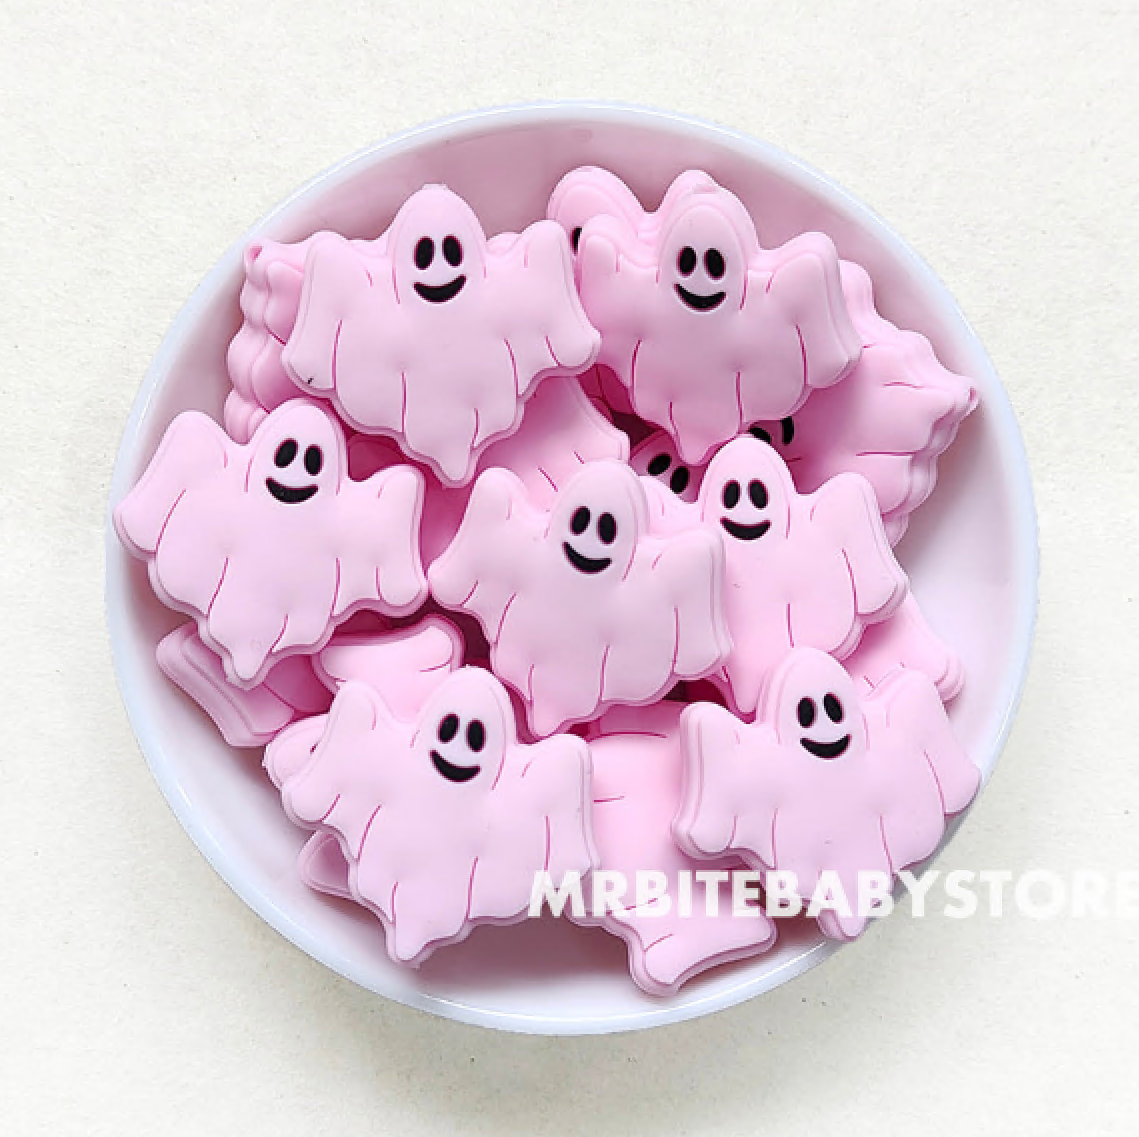 Halloween Ghost Silicone Beads - 30*32mm